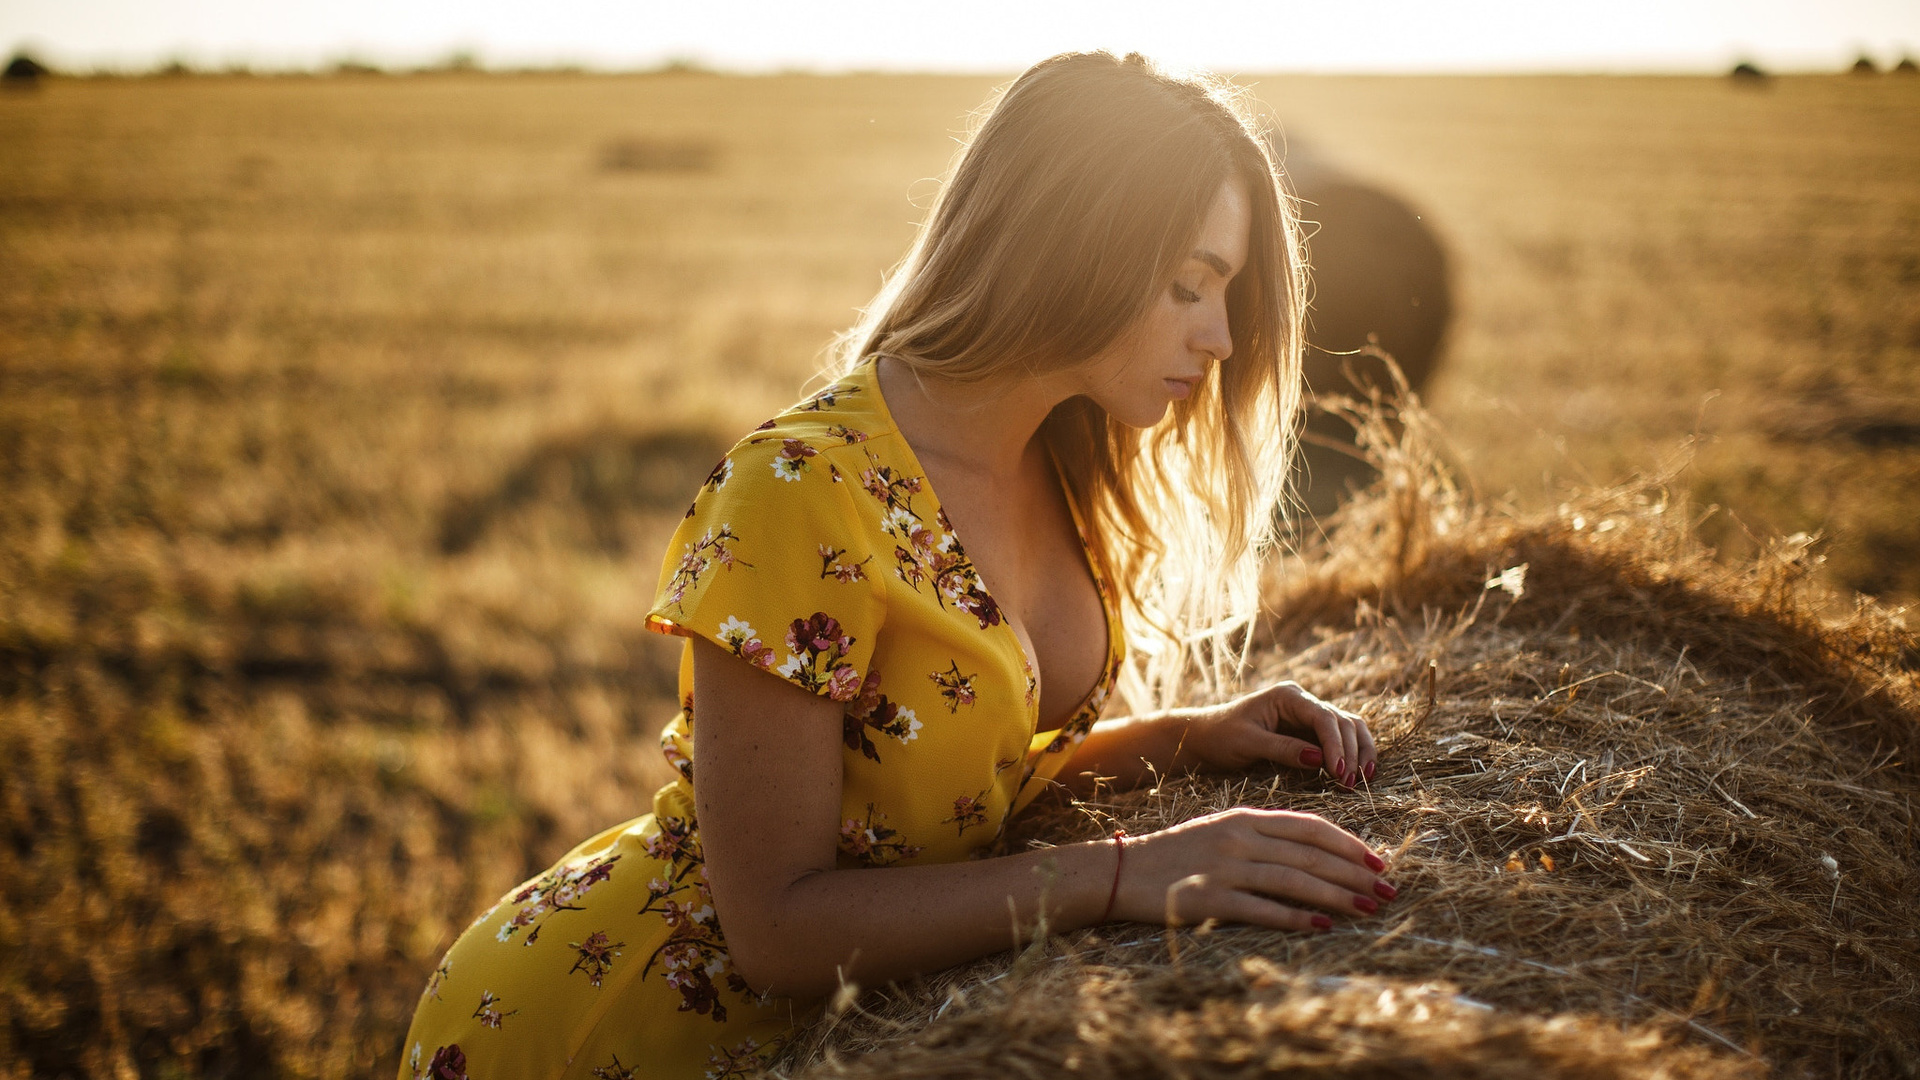 women, hay, red nails, yellow dress, blonde, women outdoors, cleavage, portrait